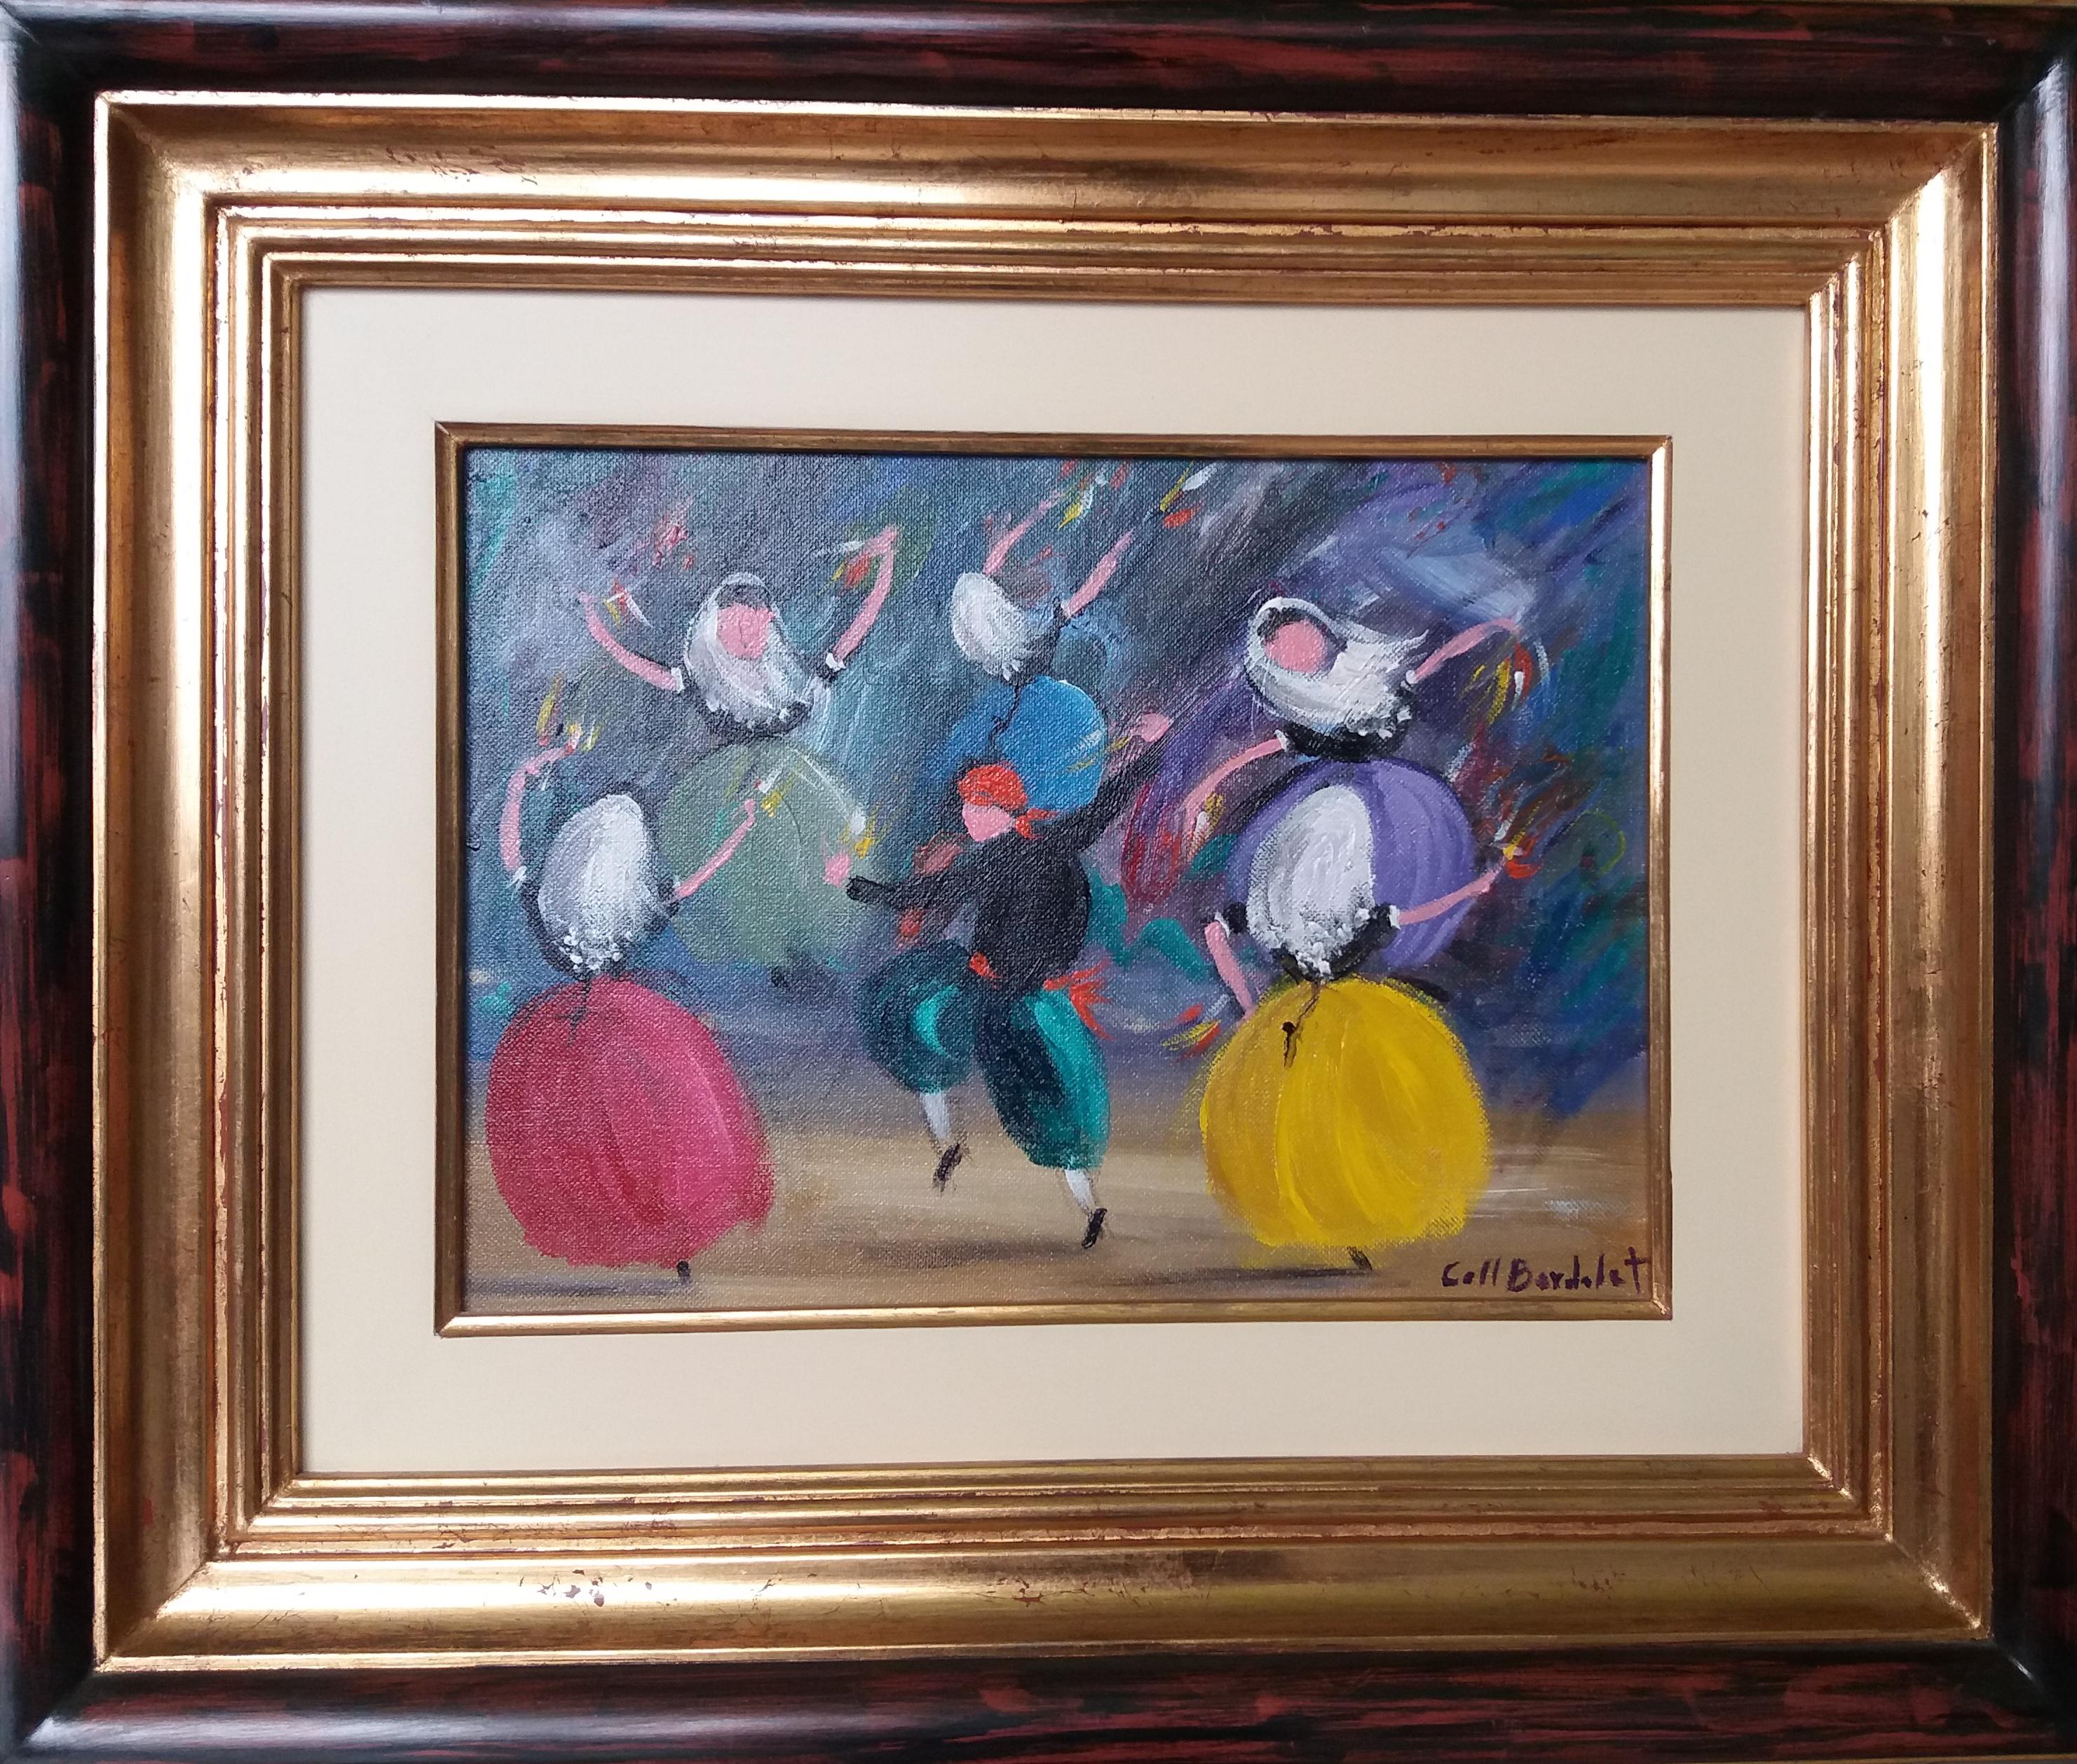  Coll Bardolet  200 Typical Mallorcan Dance. original expressionist  painting